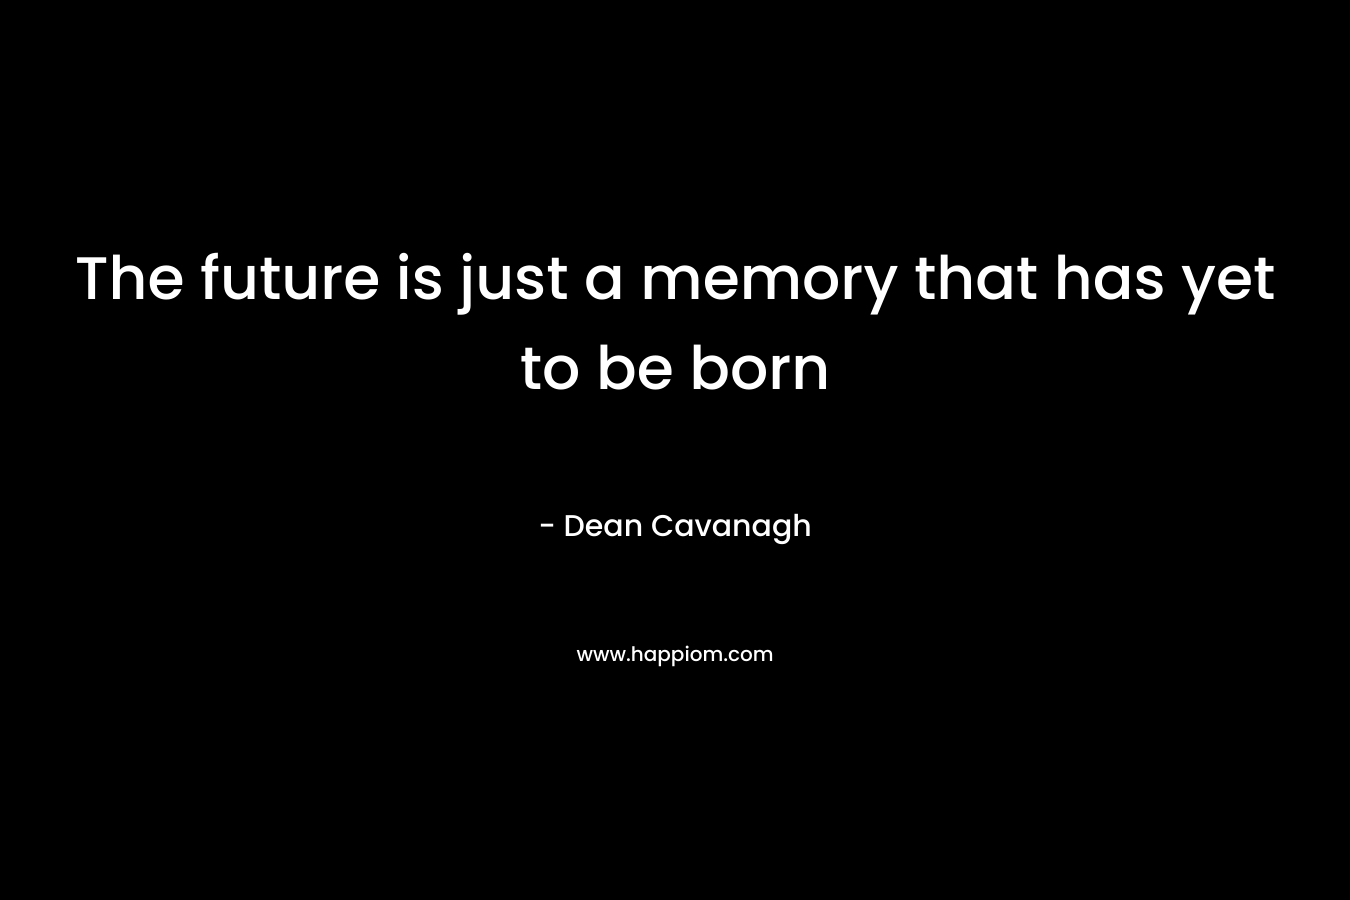 The future is just a memory that has yet to be born